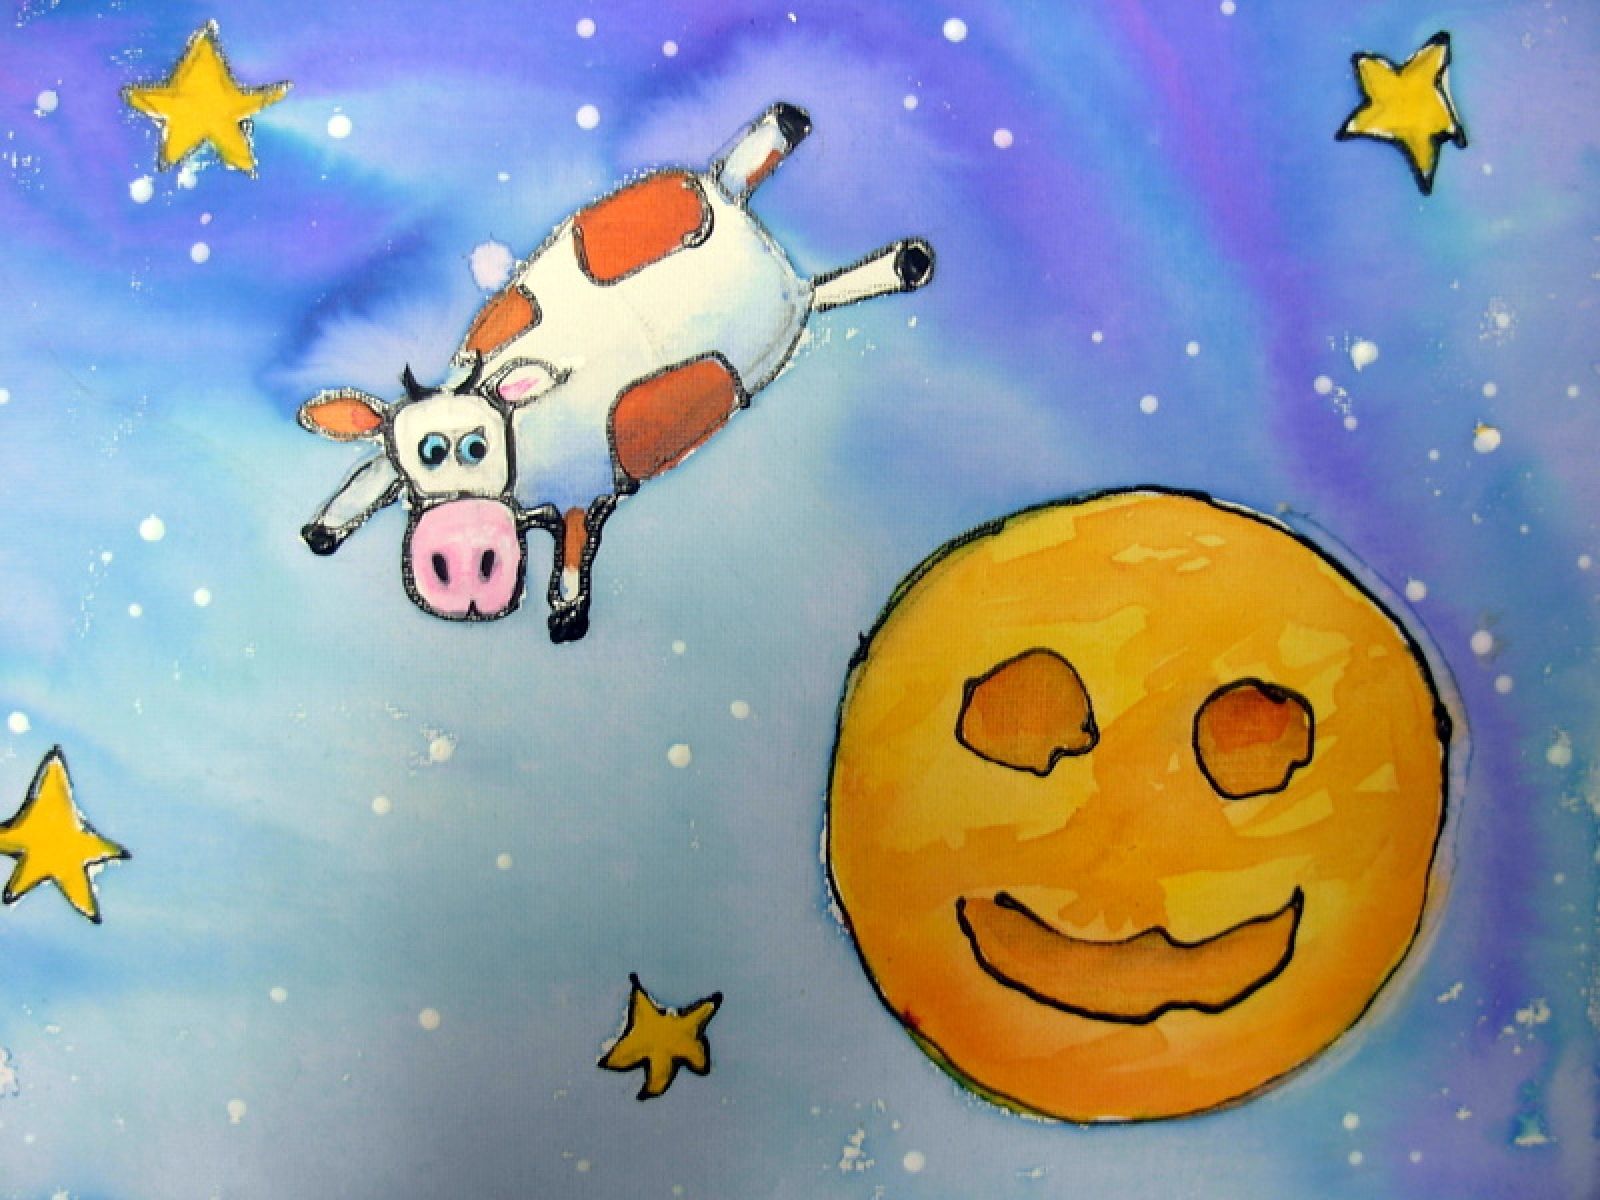 And the cow jumped over the moon. sue gunter art